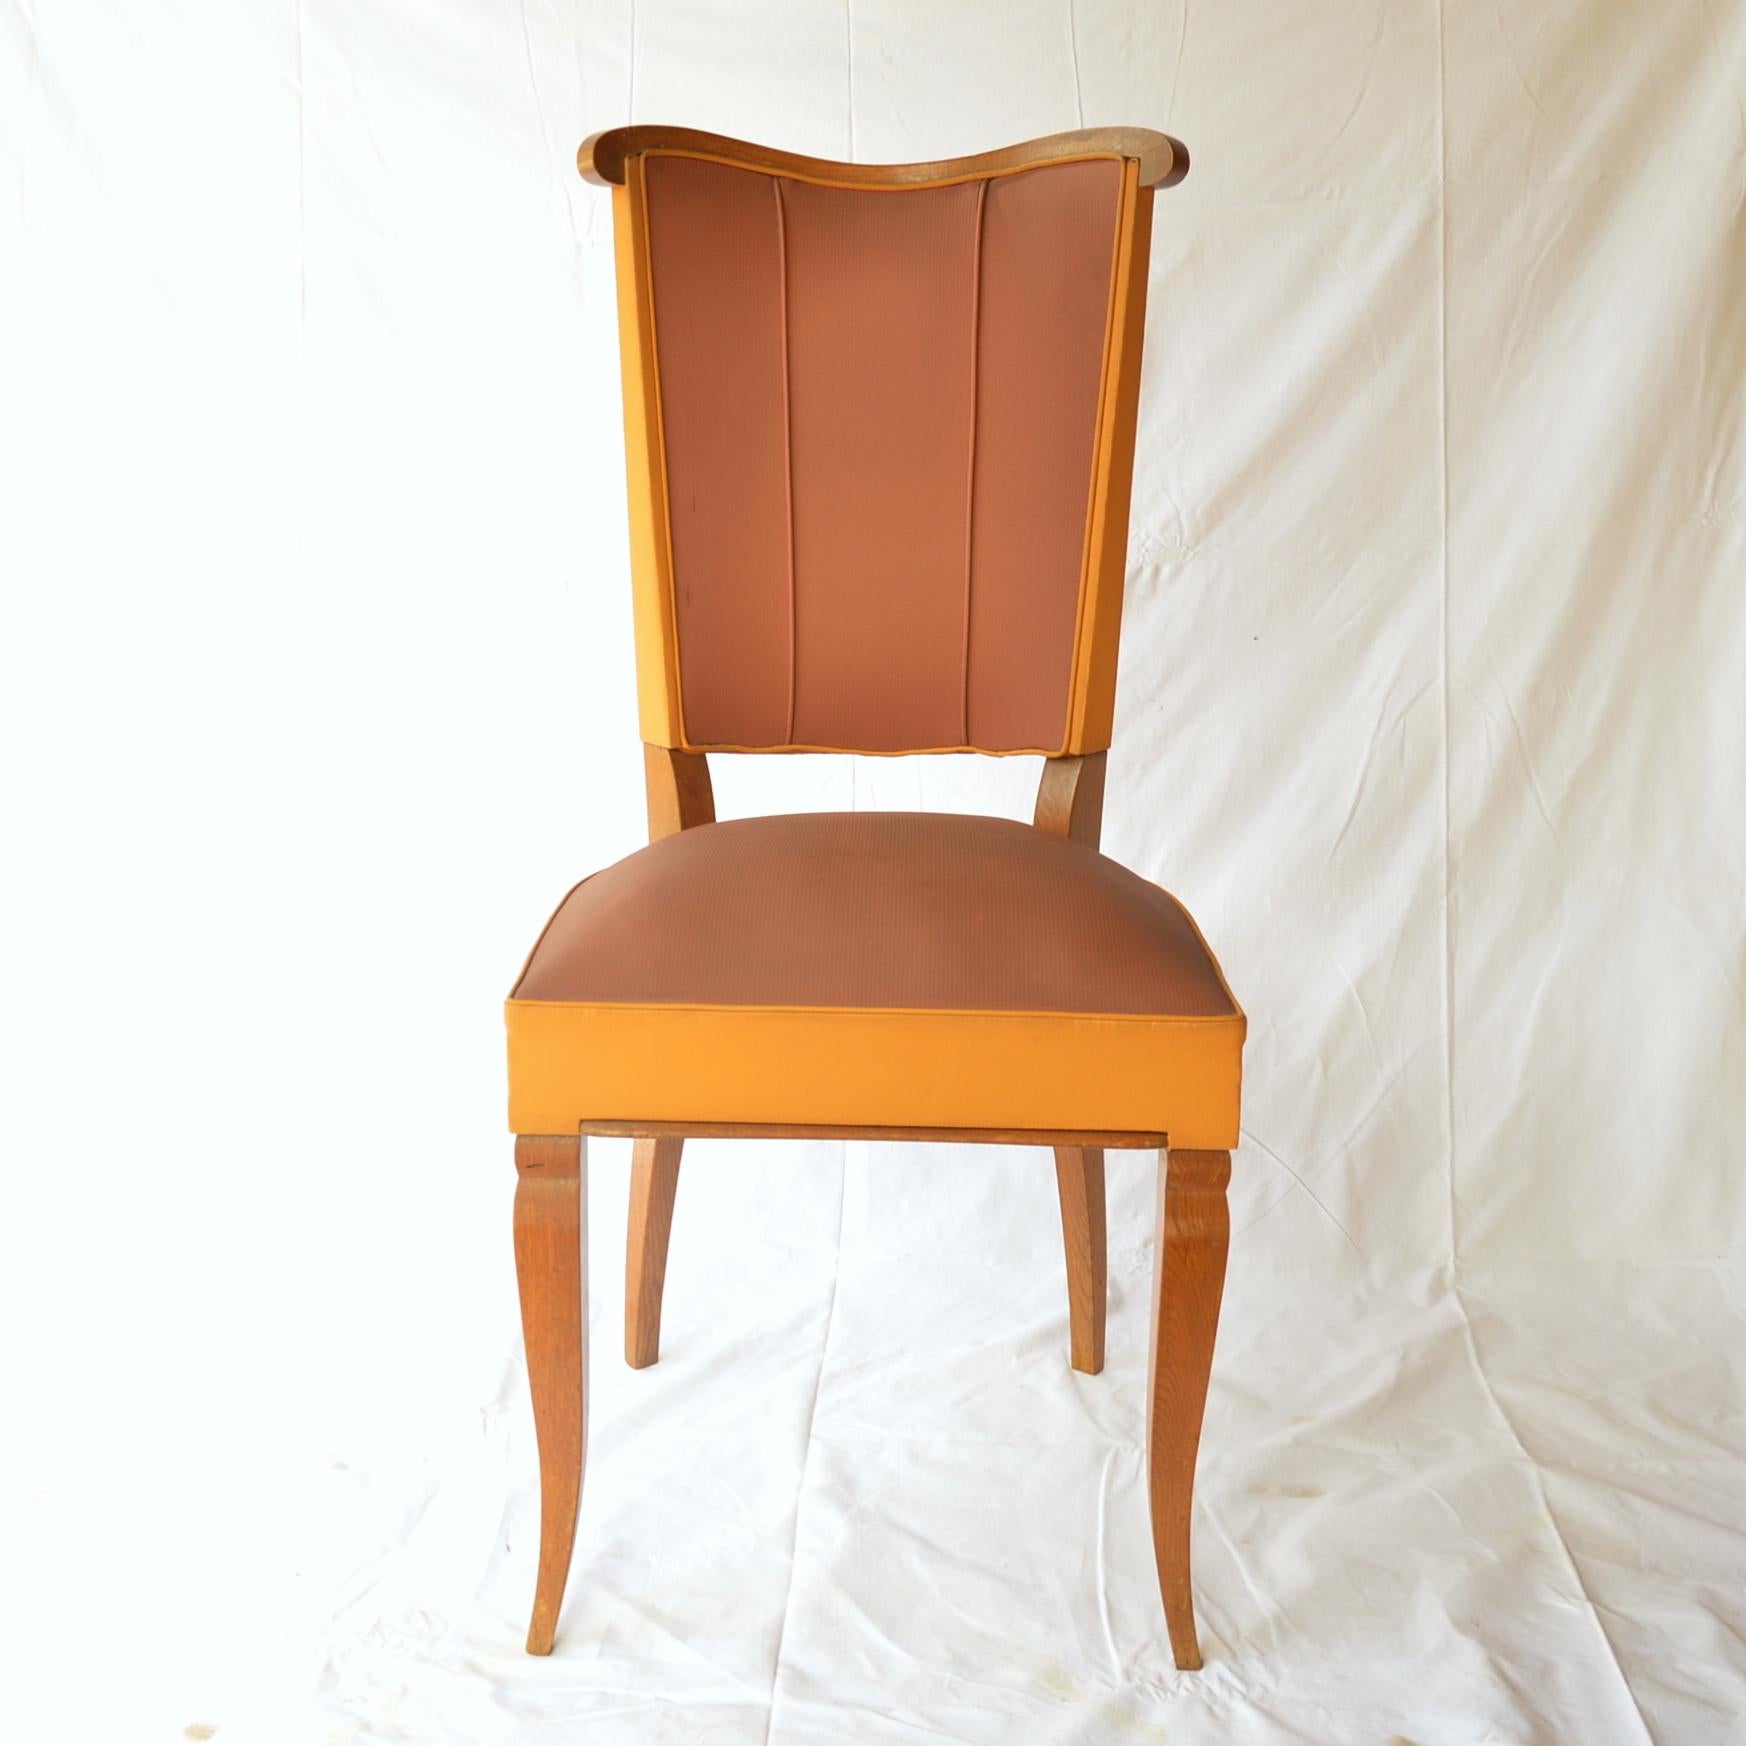 A sex of six authentic French Art Deco dining chairs from the 1930s. Made of wood with cream color Moleskine.
Very good condition.
Dimensions: height 100 cm.